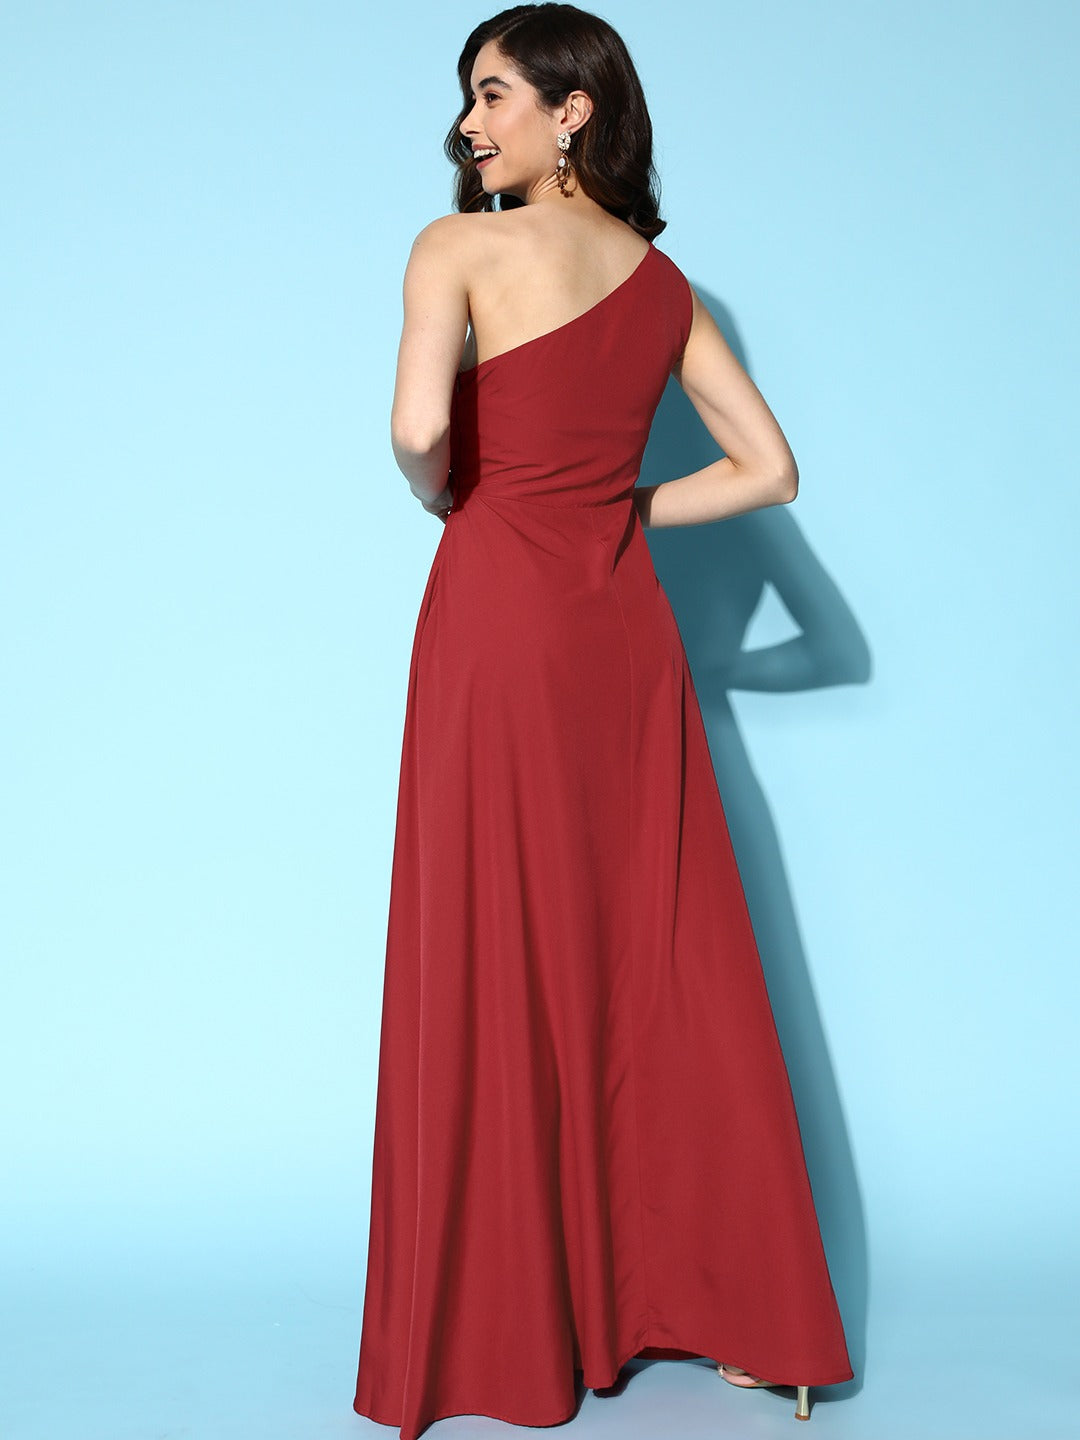 Berrylush Women Solid Red One-Shoulder Neck Thigh-High Slit Flared Maxi Dress